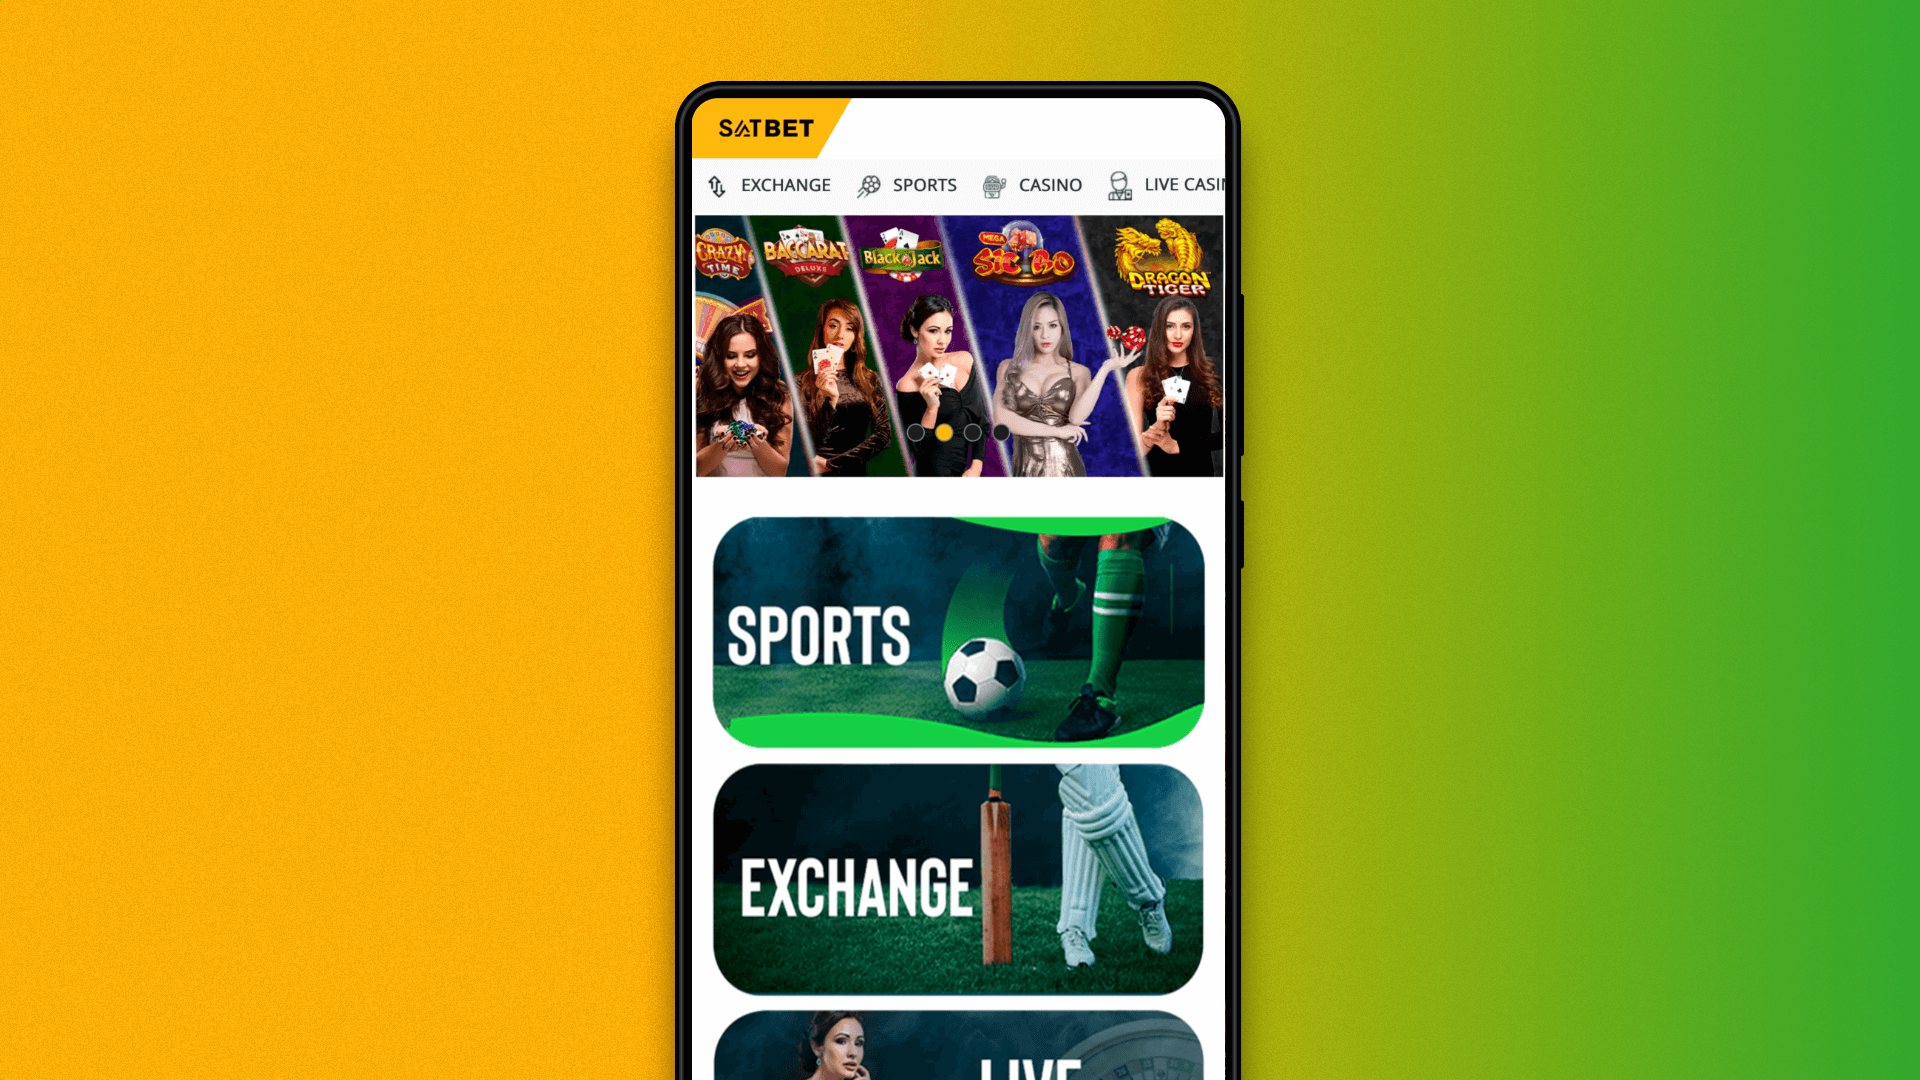 Main page of the mobile version of Satbet